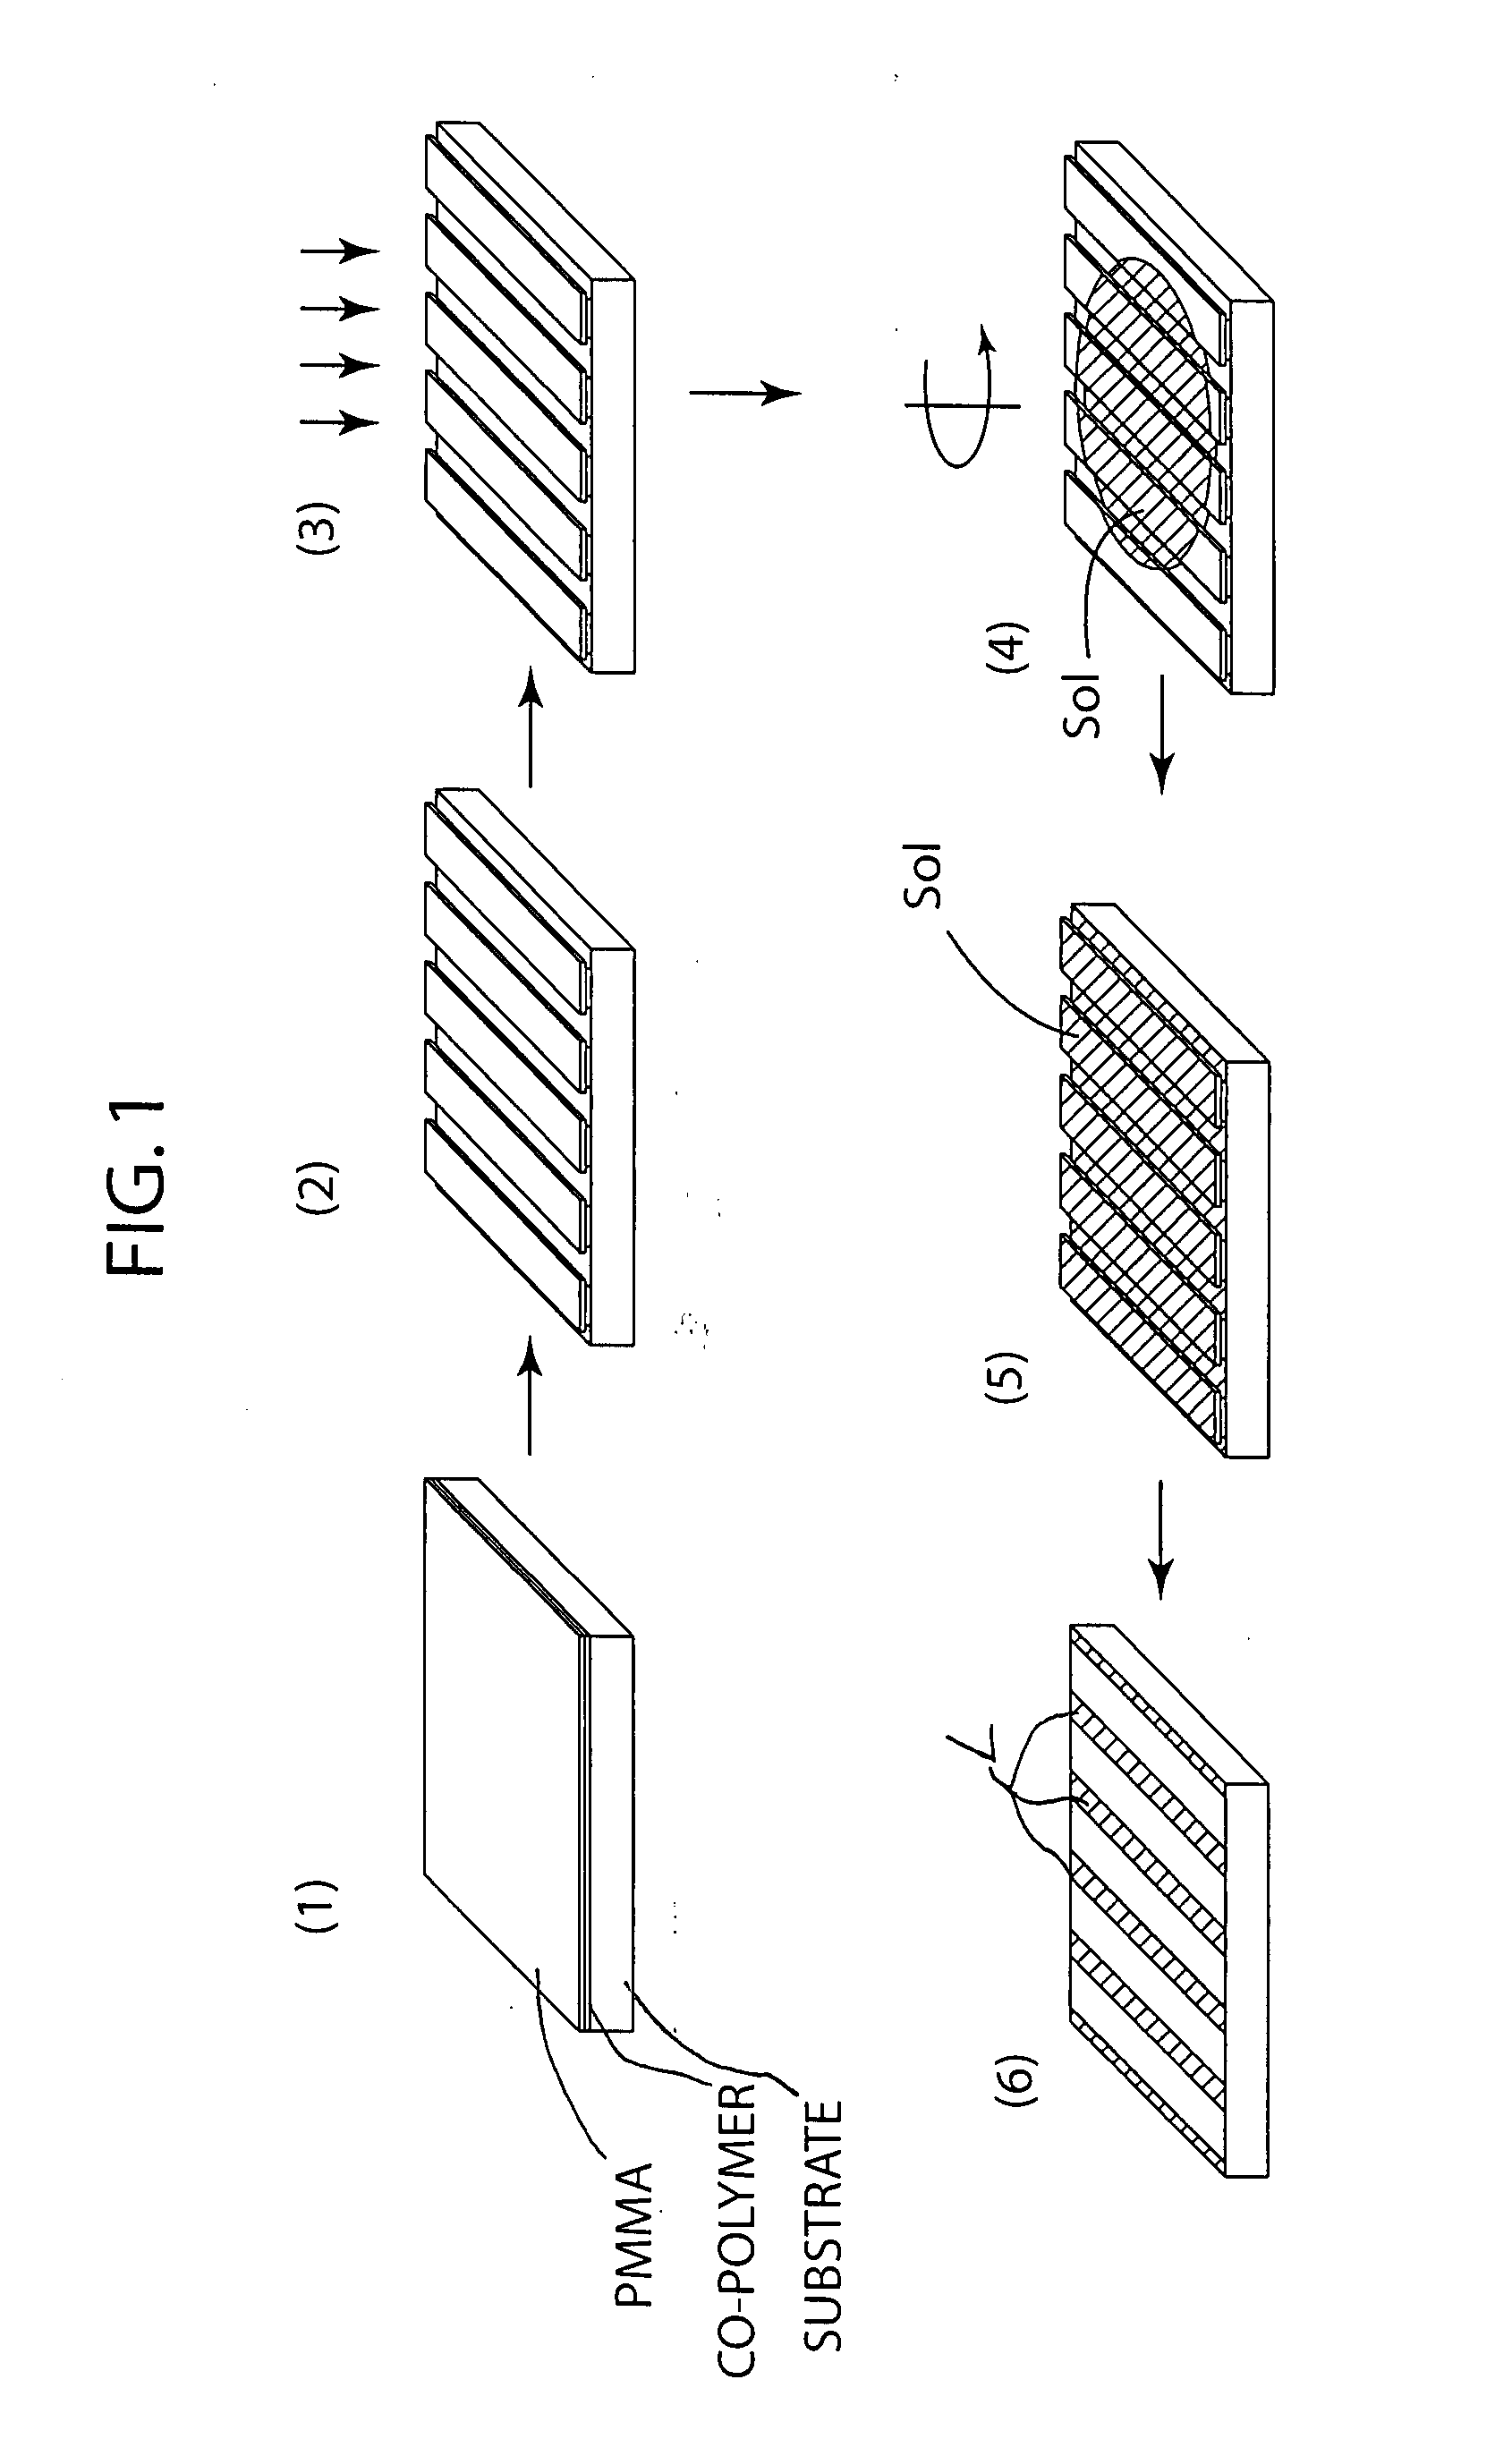 Method of making nanopatterns and nanostructures and nanopatterned functional oxide materials